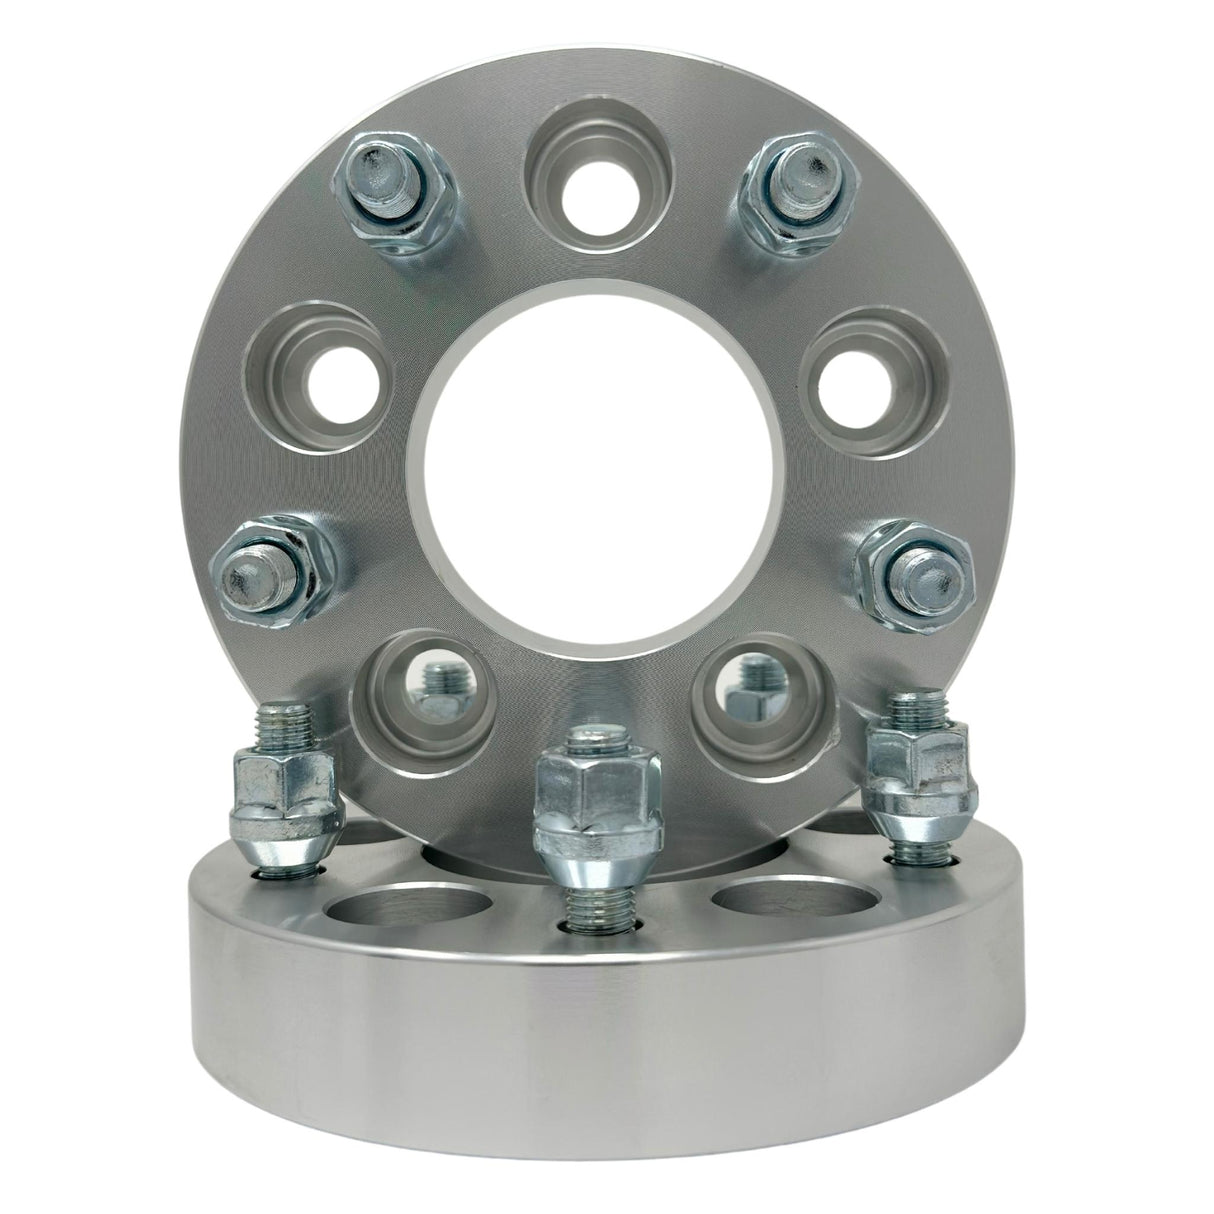 5x5 (5x127) Wheel Spacers 1.25" - 2" Inch (32-50mm) 1/2-20 Studs & Lug Nuts 74mm Center Bore